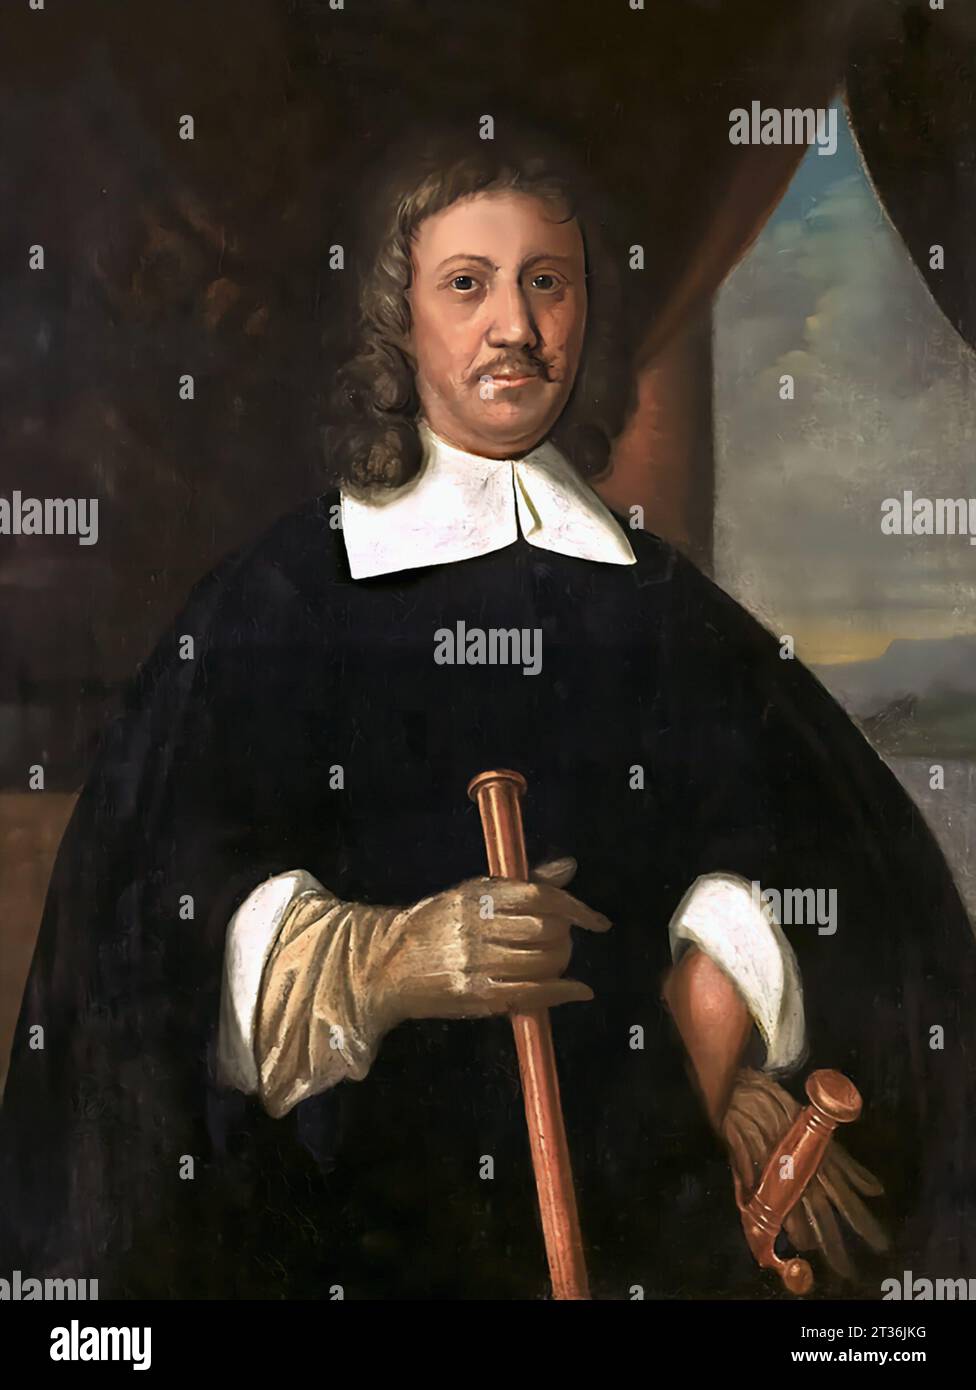 Jan van Riebeeck. Portrait of the Dutch navigator and Dutch East India Company administrator, Johan Anthoniszoon 'Jan' van Riebeeck (1619-1677), unknown artist, oil on canvas, c. 1660 Stock Photo